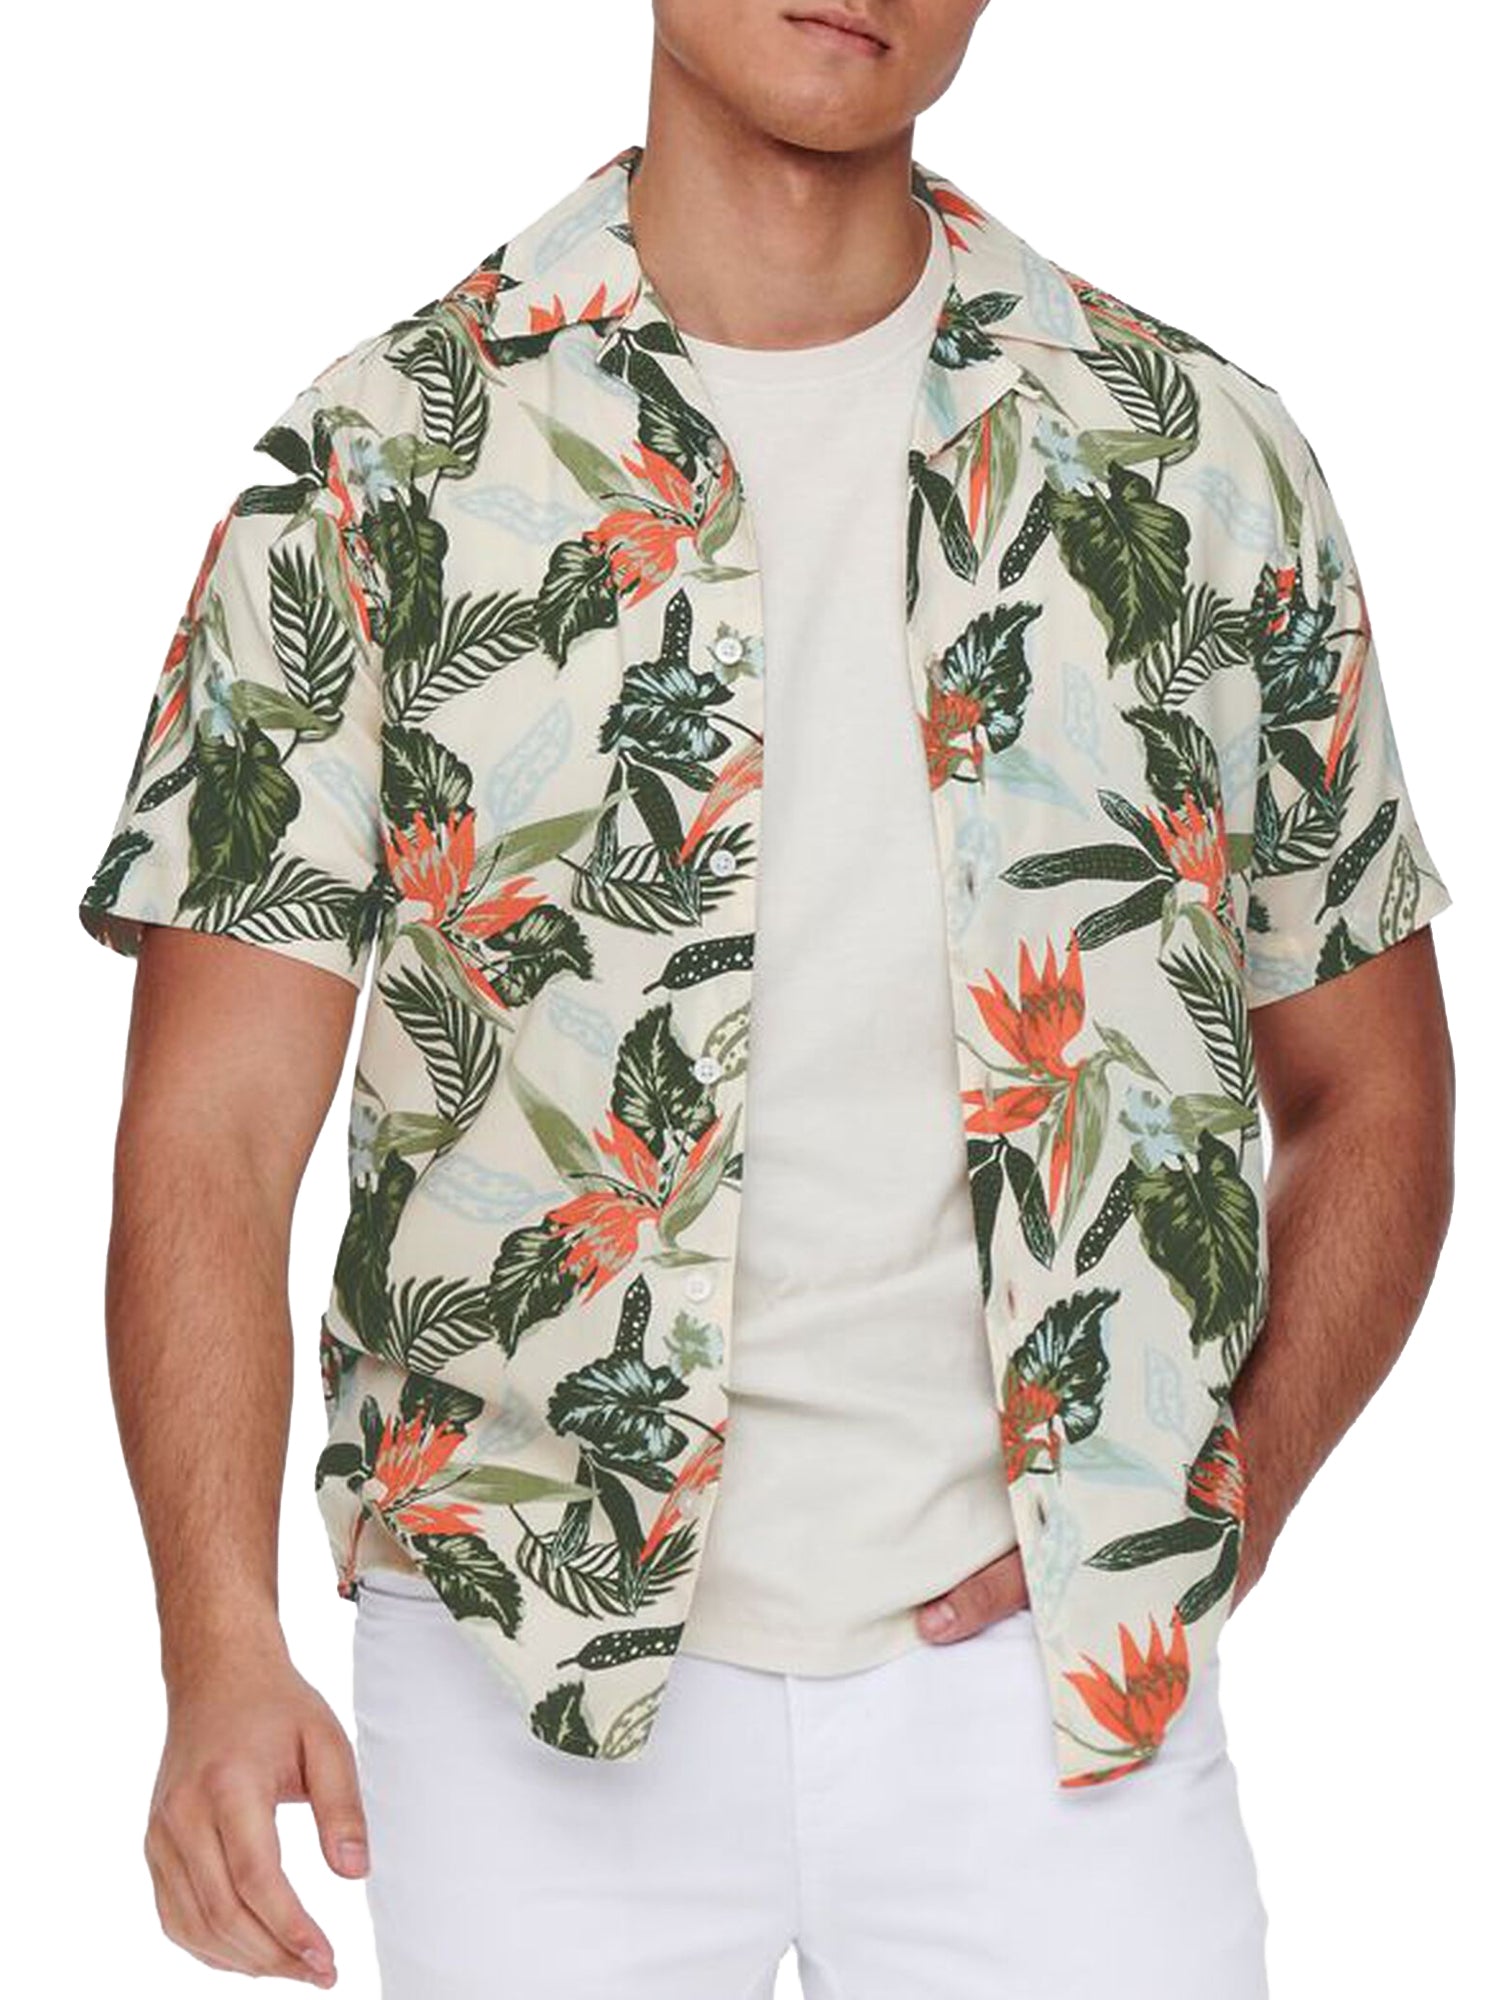 ONLY&SONS CAMICIA STAMPATA FANTASIA TROPICALE